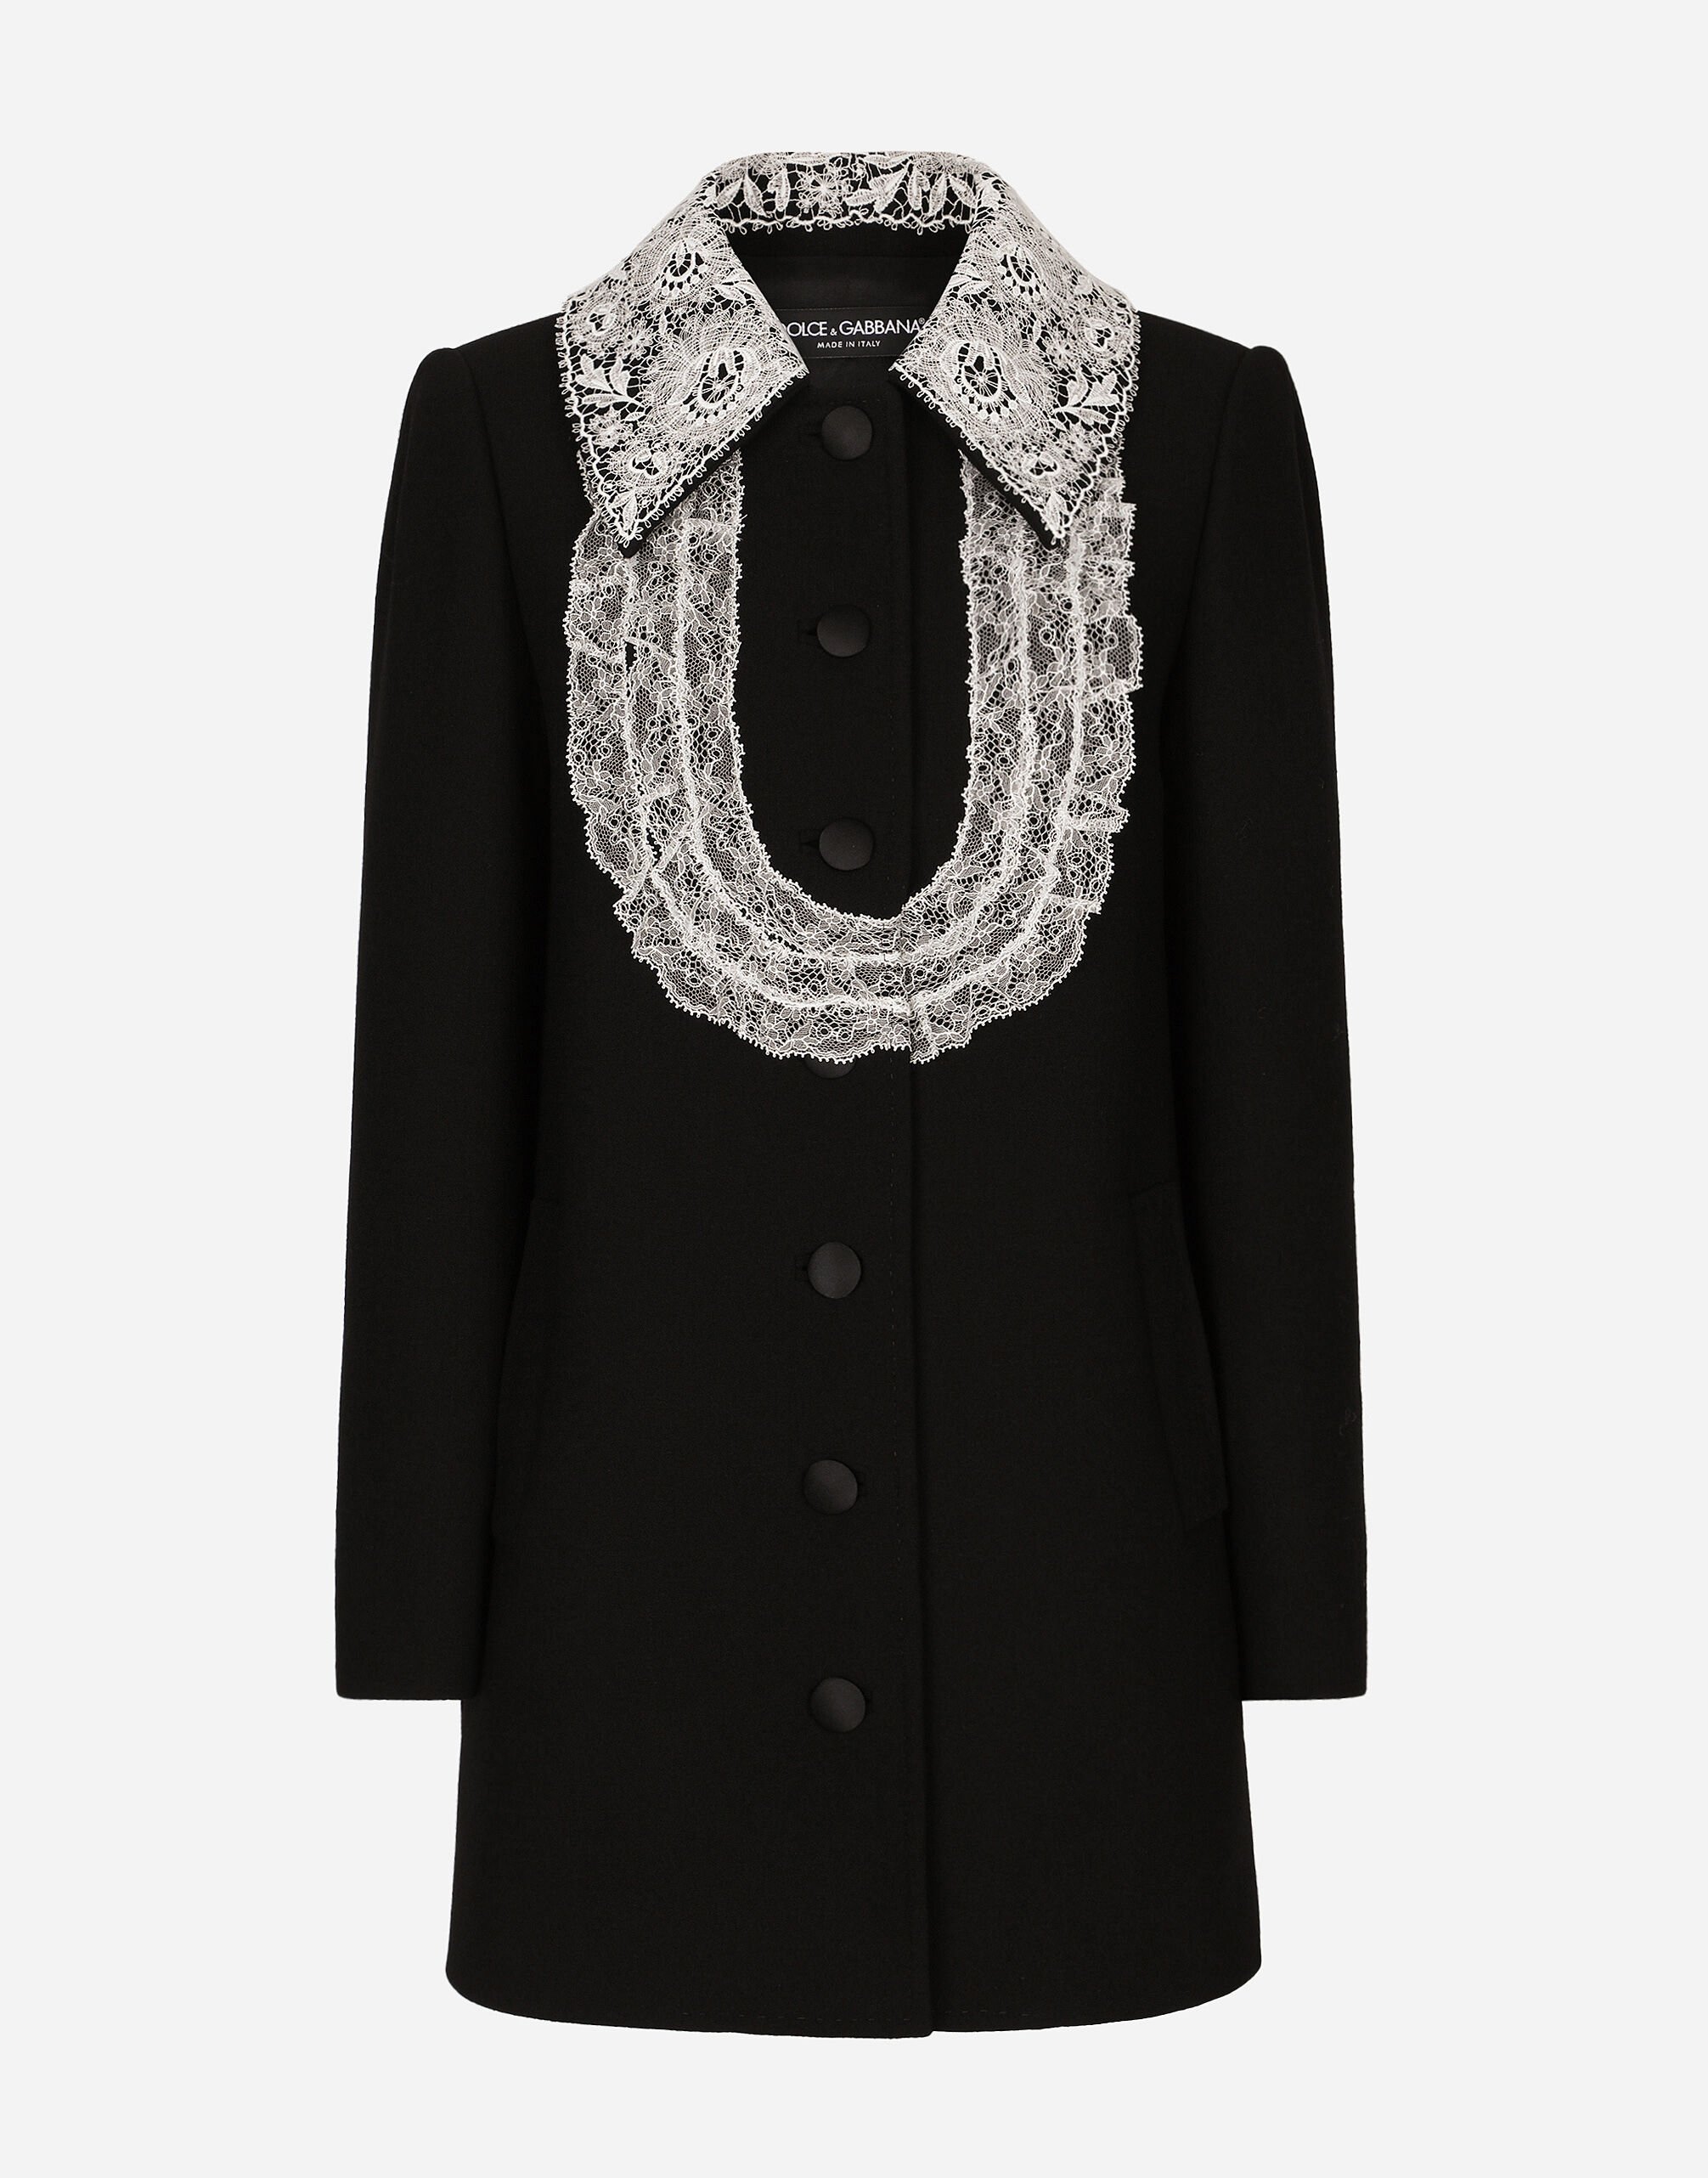 Dolce & Gabbana Short wool coat with lace details White F0E1XTFJTBV